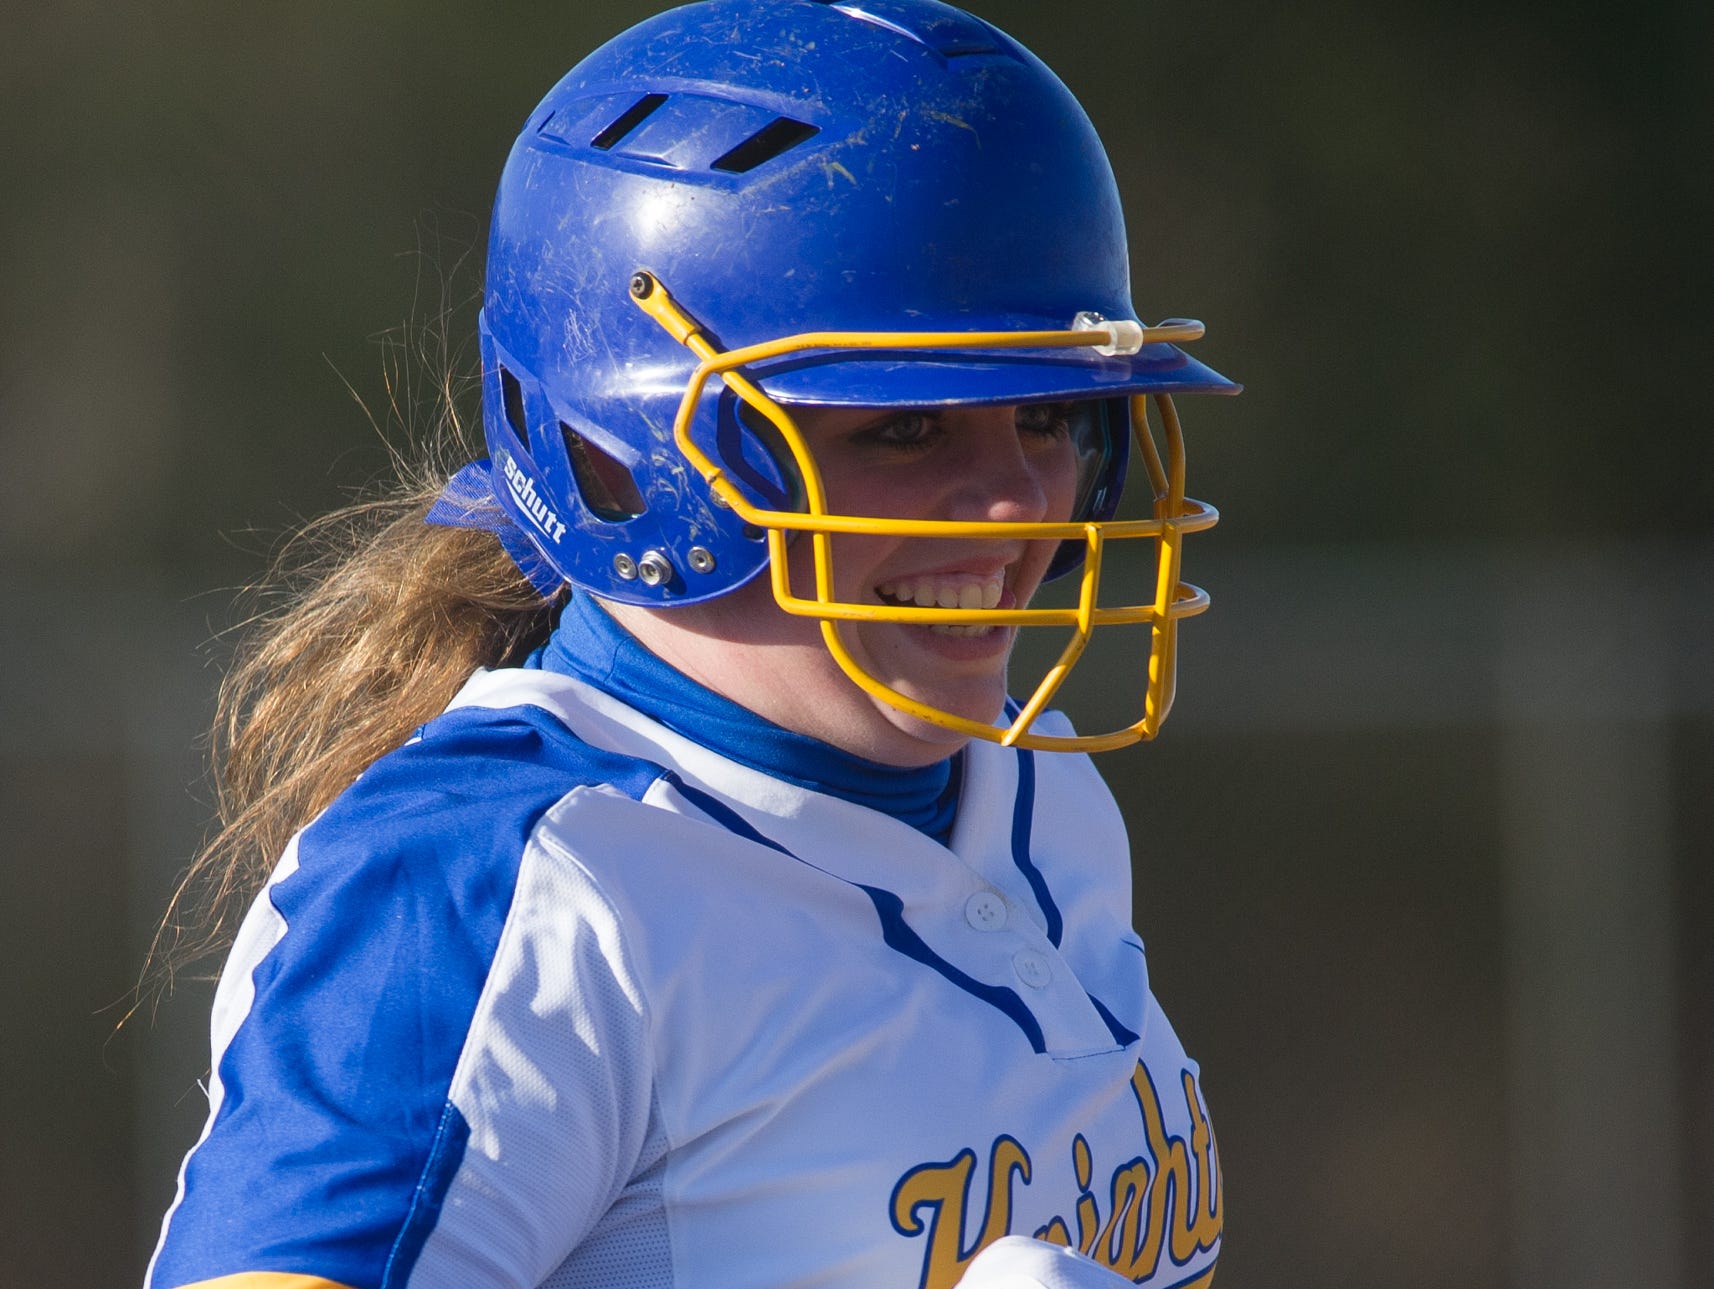 Sussex Central's Morgan Burton (13) is all smiles after scoring in the 5th inning against Sussex Tech.